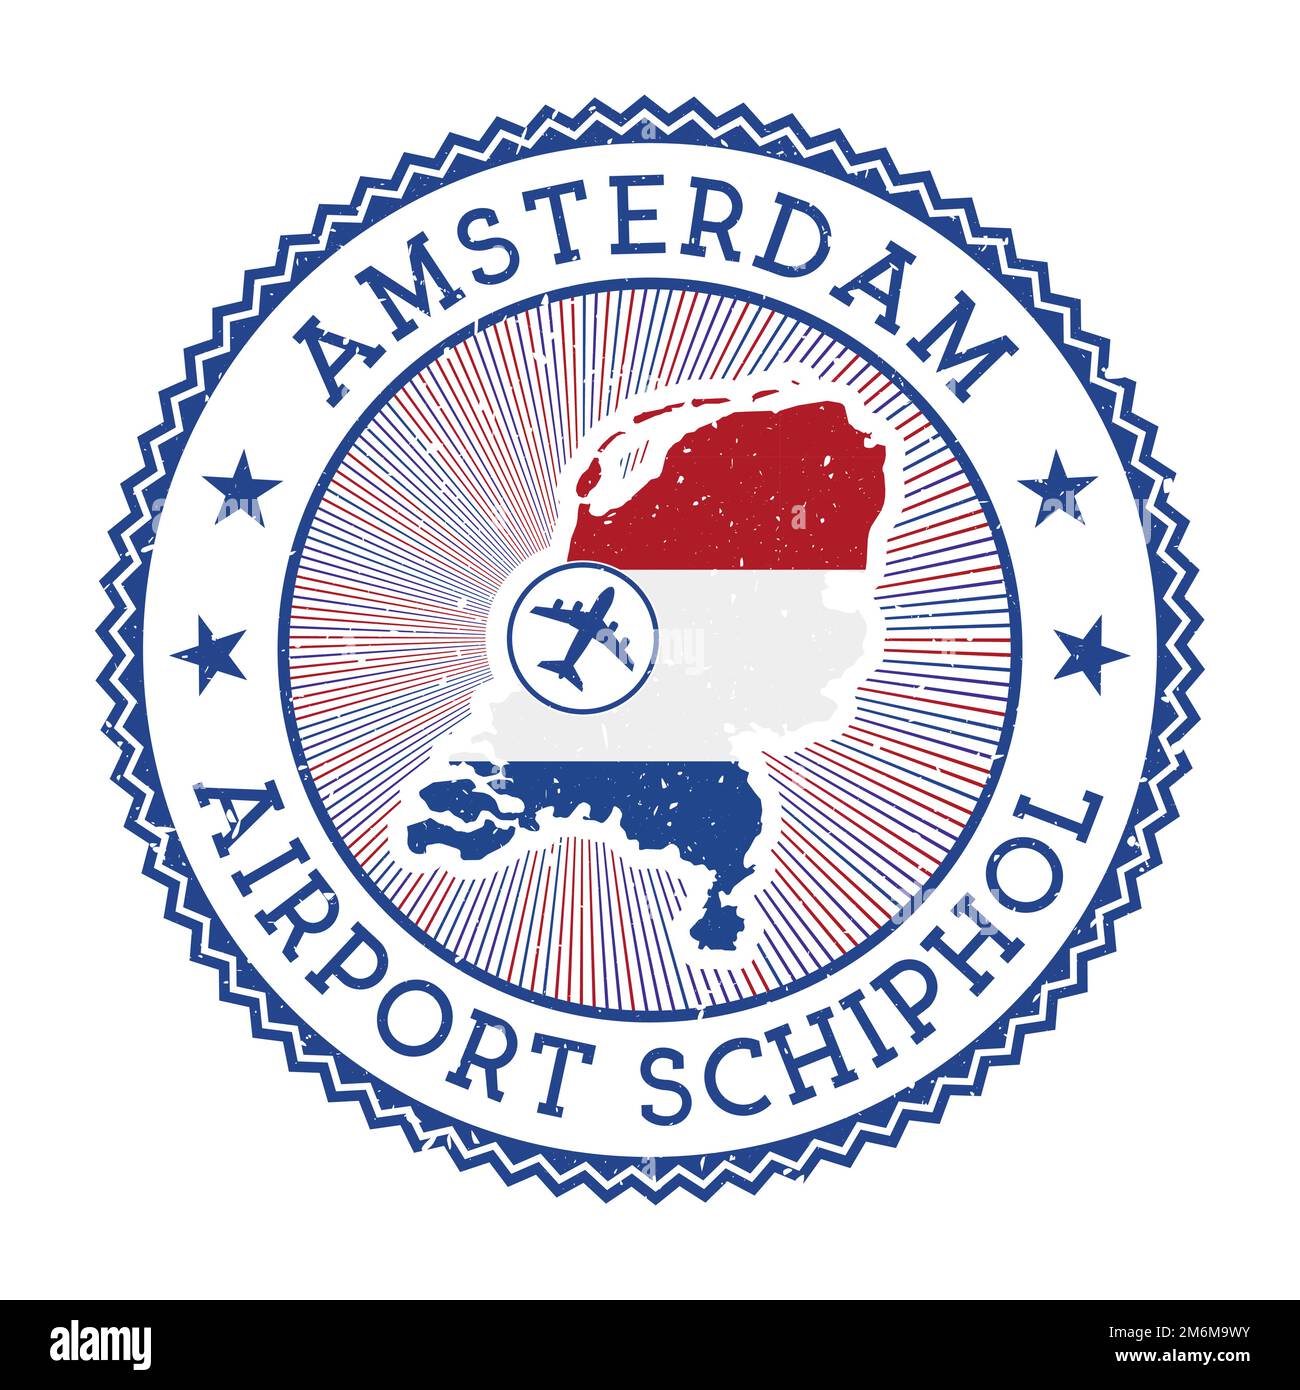 Amsterdam Airport Schiphol stamp. Airport logo vector illustration. Amsterdam aeroport with country flag. Stock Vector